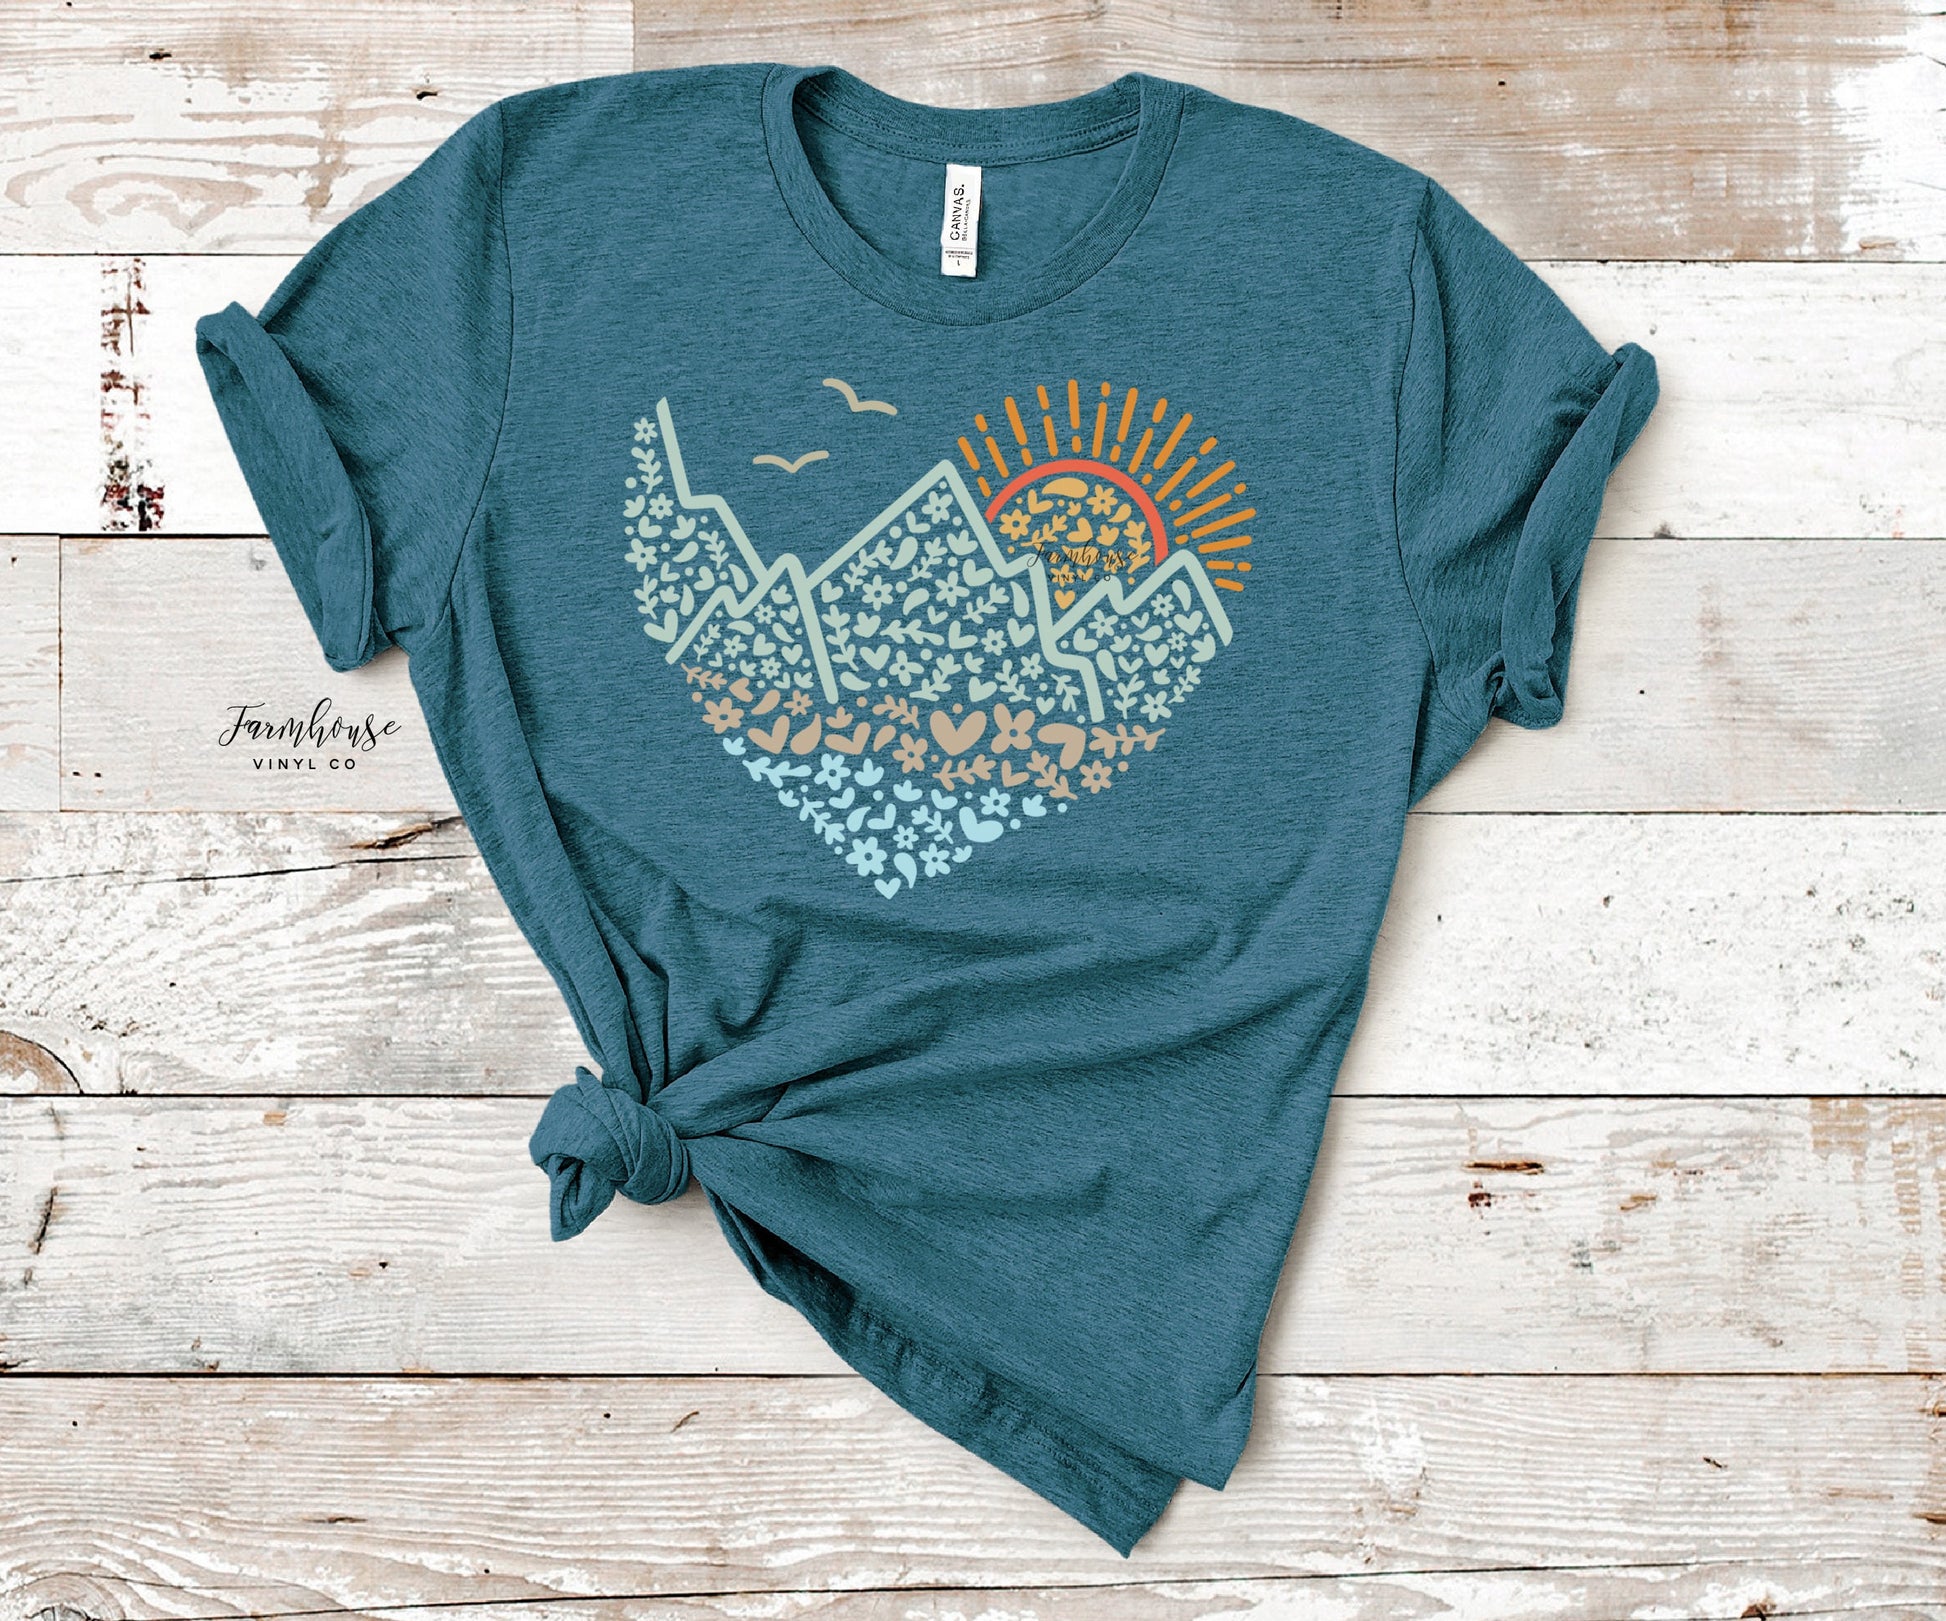 Camera Mountain Outdoor T shirt / The Great Outdoors / Wanderlust Explore More Tee / Unisex Gift Men Women Birthday / Youth Adult Kids Tees - Farmhouse Vinyl Co